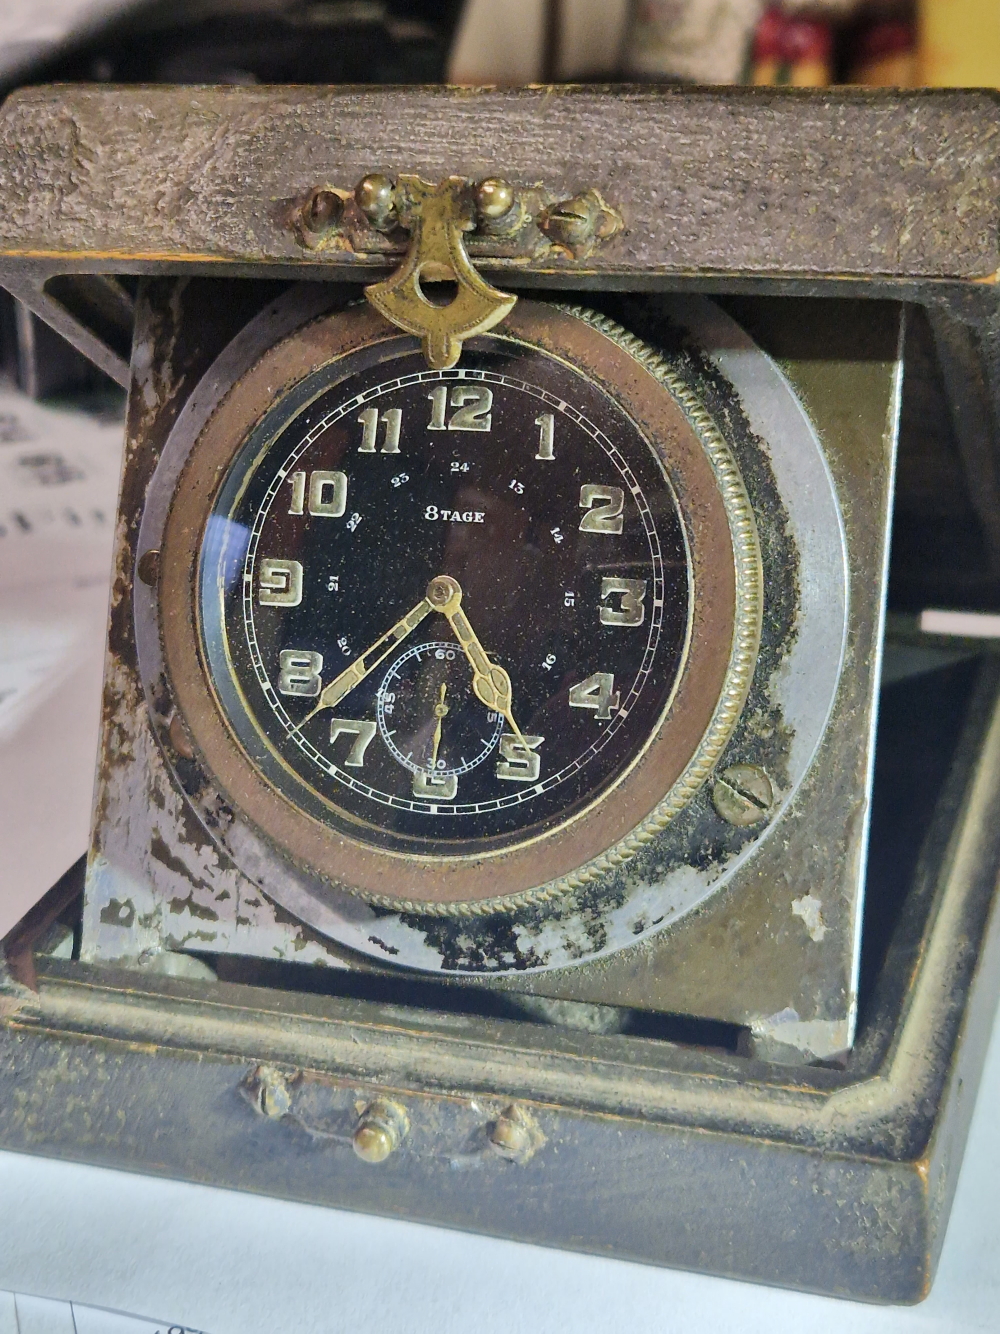 AN EARLY 20TH CENTURY AIRCRAFT OR CAR CLOCK. LATER MOUNTED IN A LIDDED BOX TOGETHER WITH CEAG COPPER